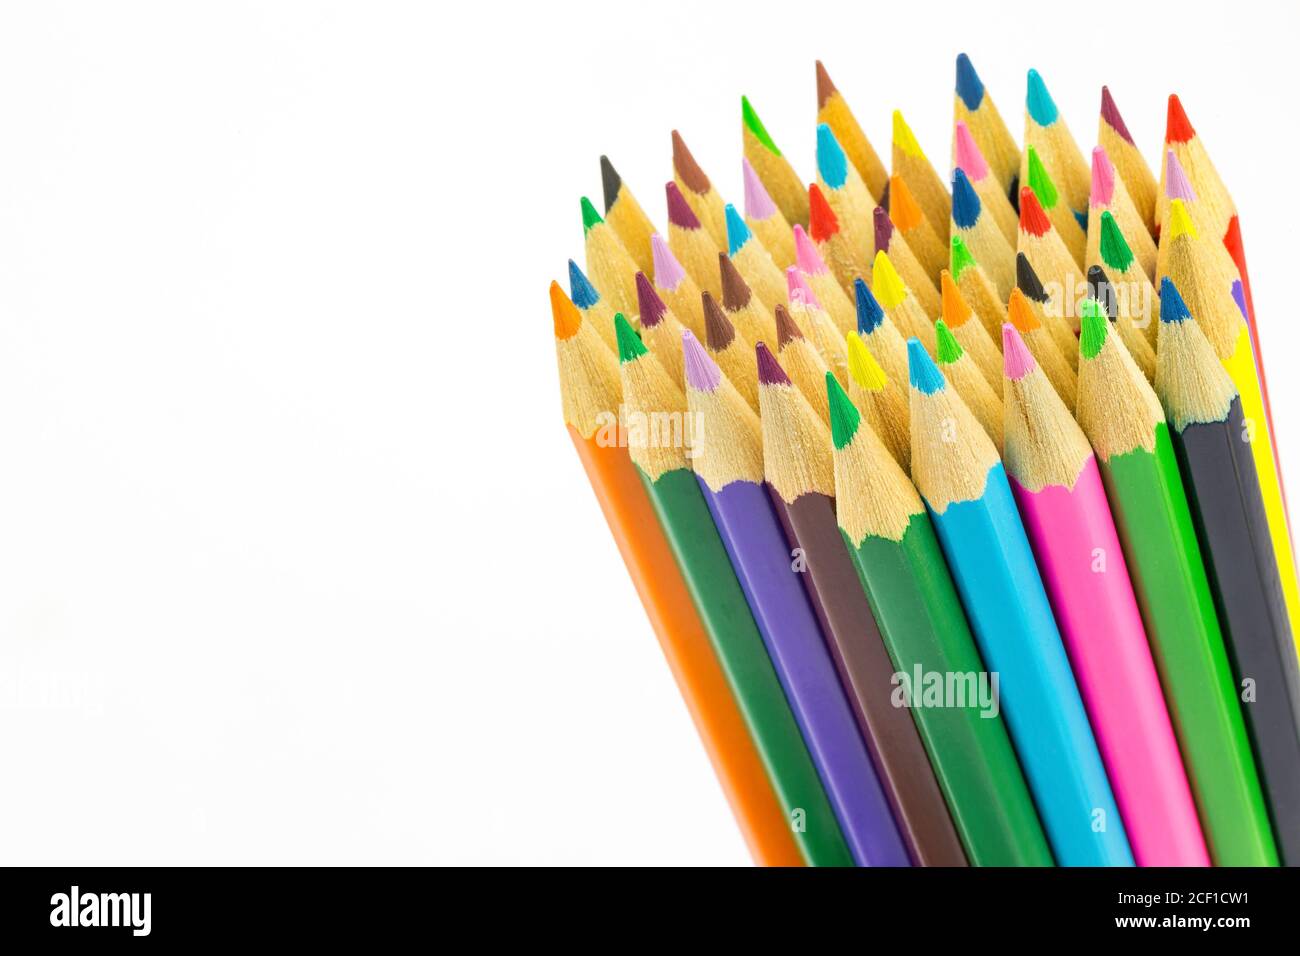 Bundle of colored pencils isolated on white background Stock Photo